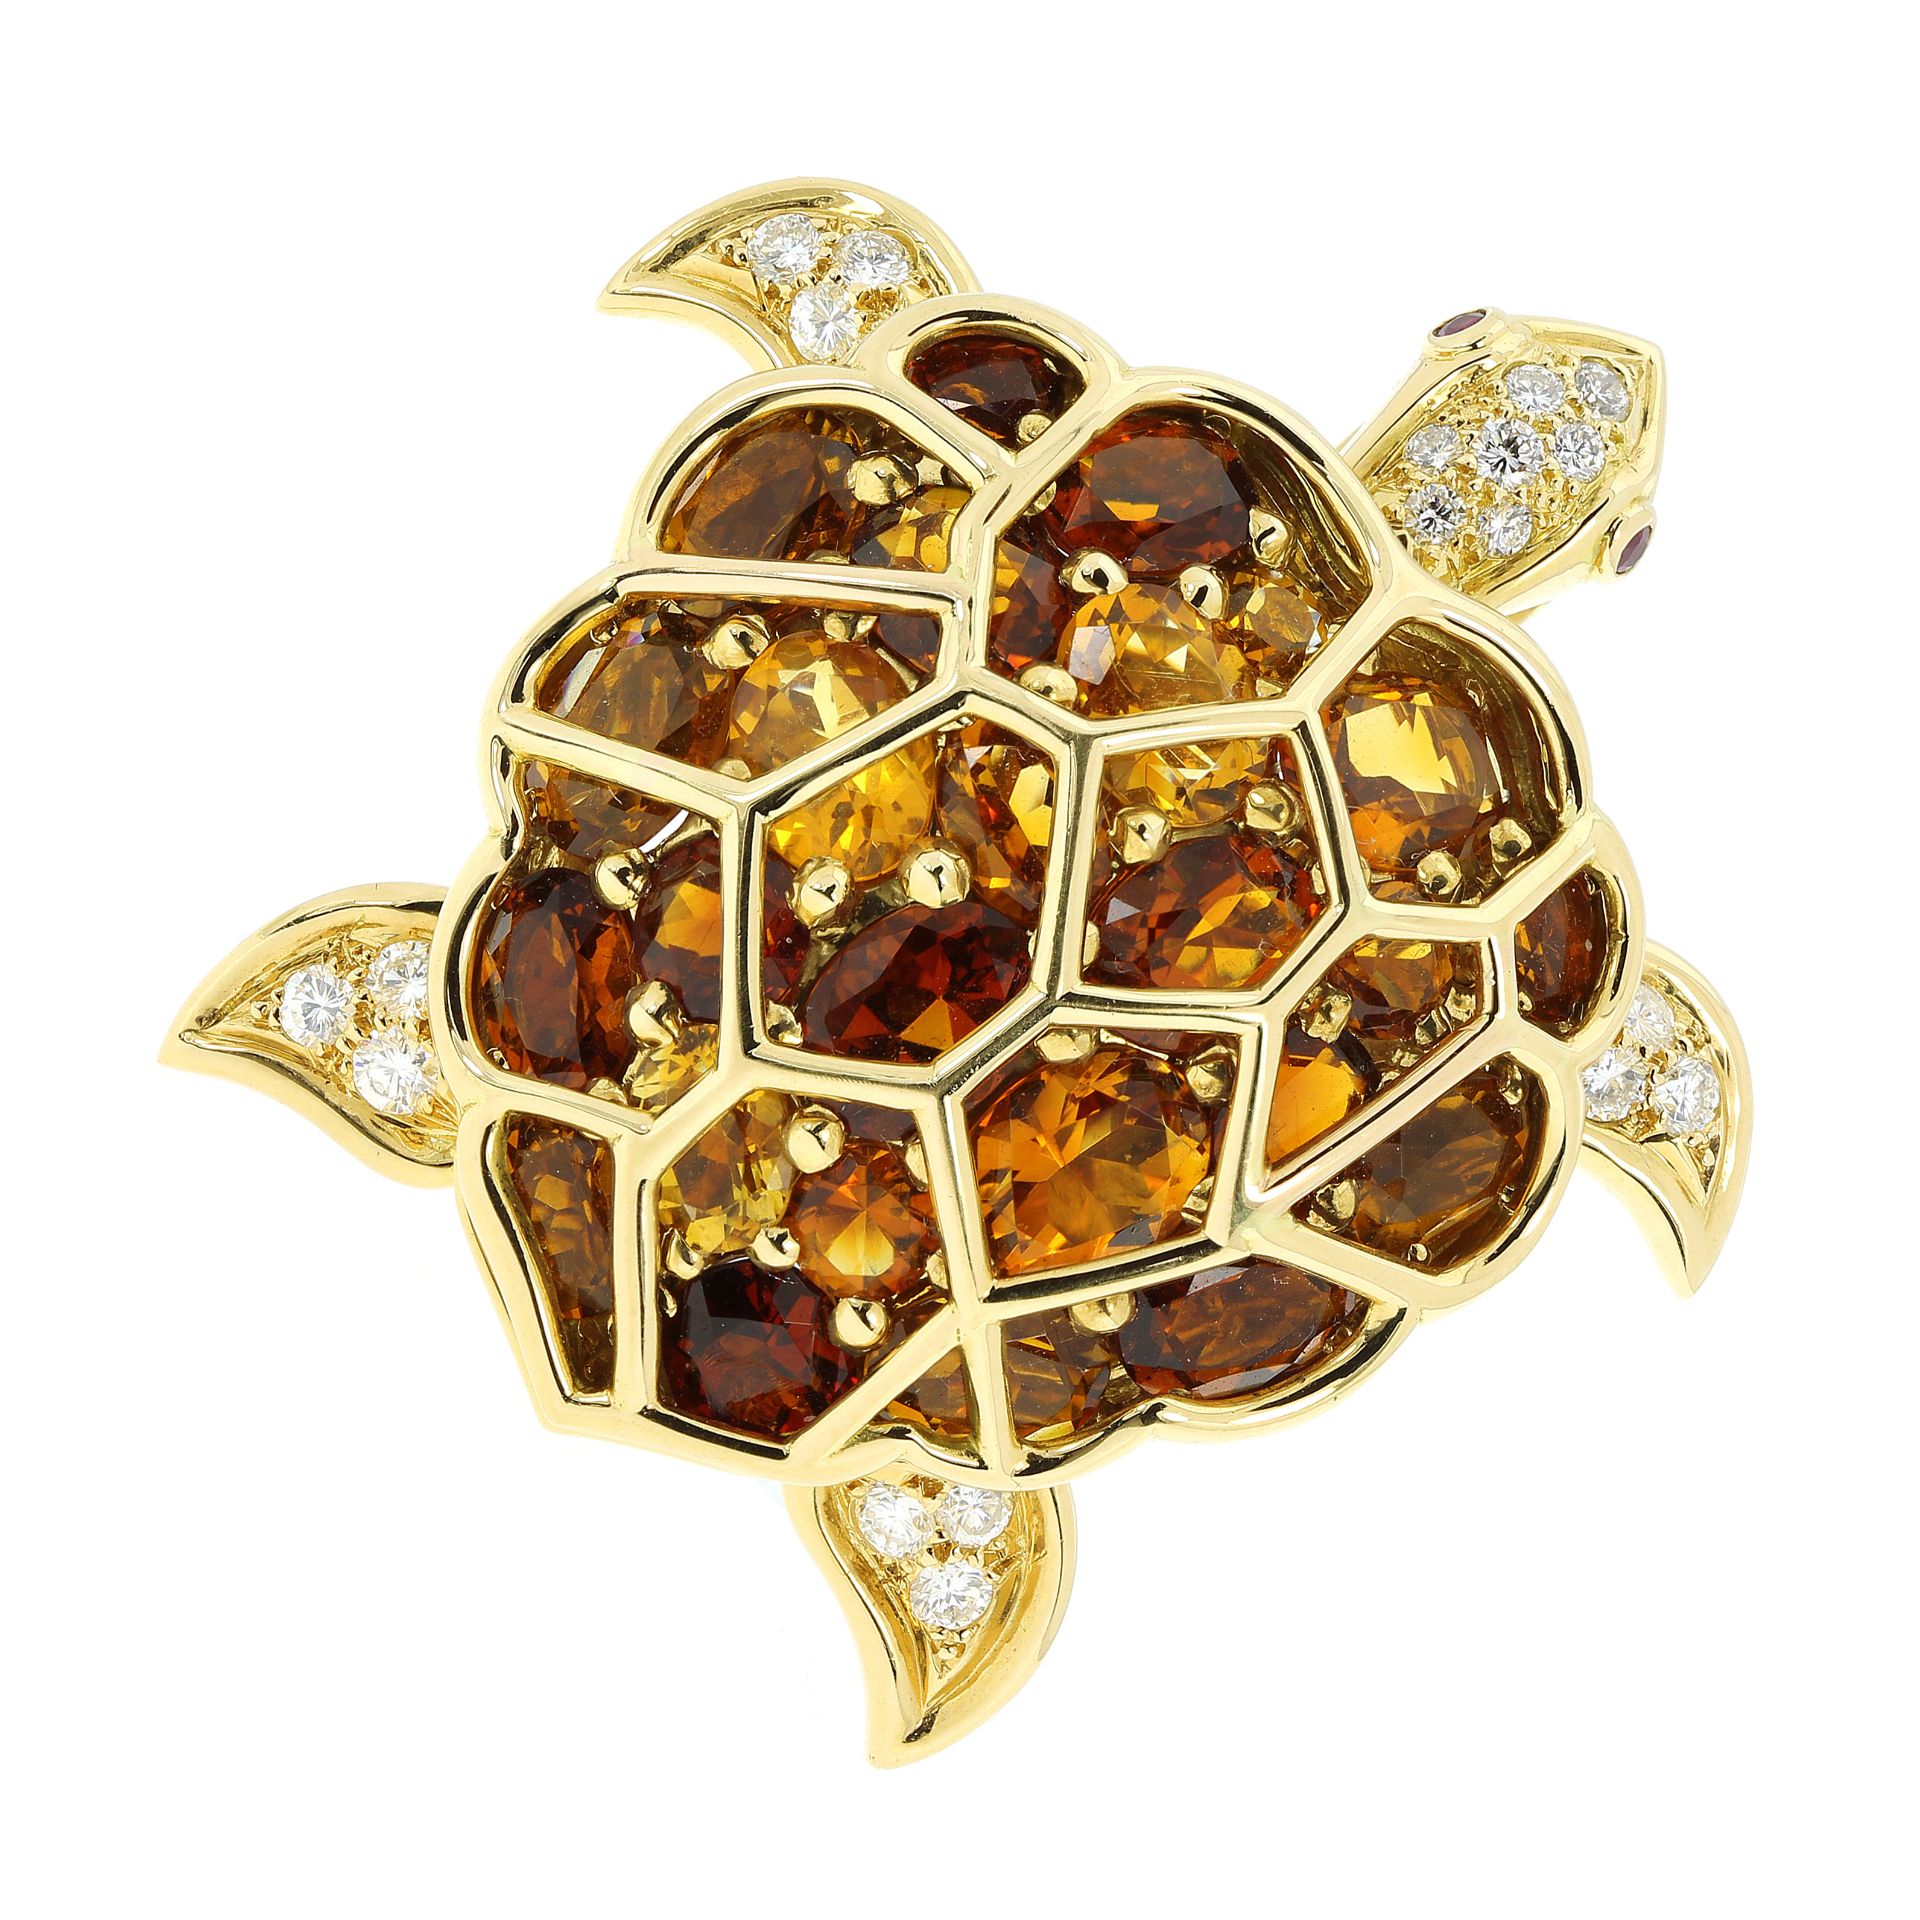 A CITRINE, DIAMOND AND RUBY TURTLE PENDANT, CHANEL in 18ct yellow gold, designed as a turtle, its